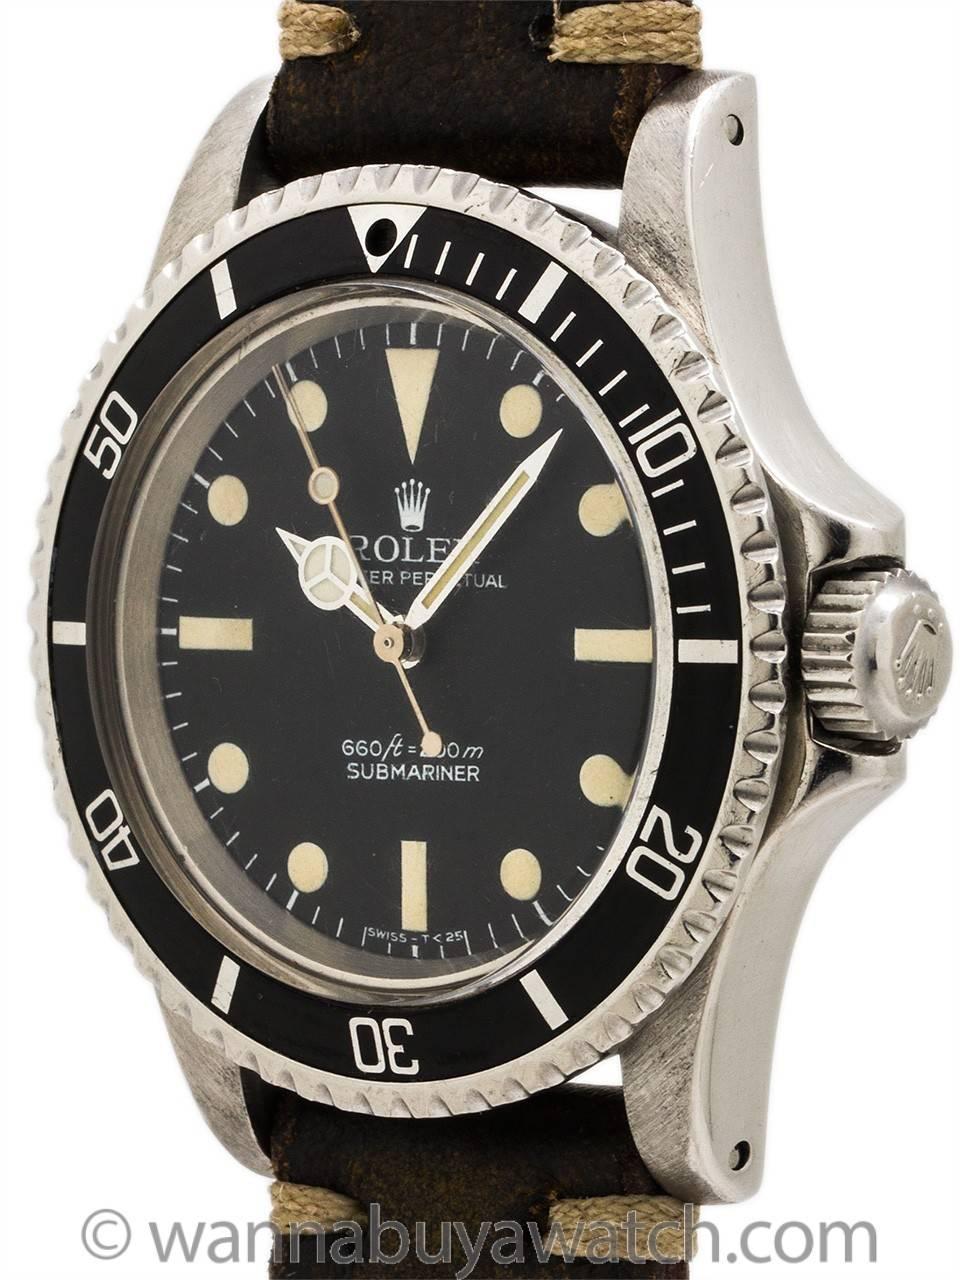 Vintage Rolex Submariner ref 5513, case serial# 5.1 million circa 1978. Very pleasing example with very nice condition original matte black dial with light patina’d luminous indexes and matching hands. With acrylic crystal and bi-directional elapsed